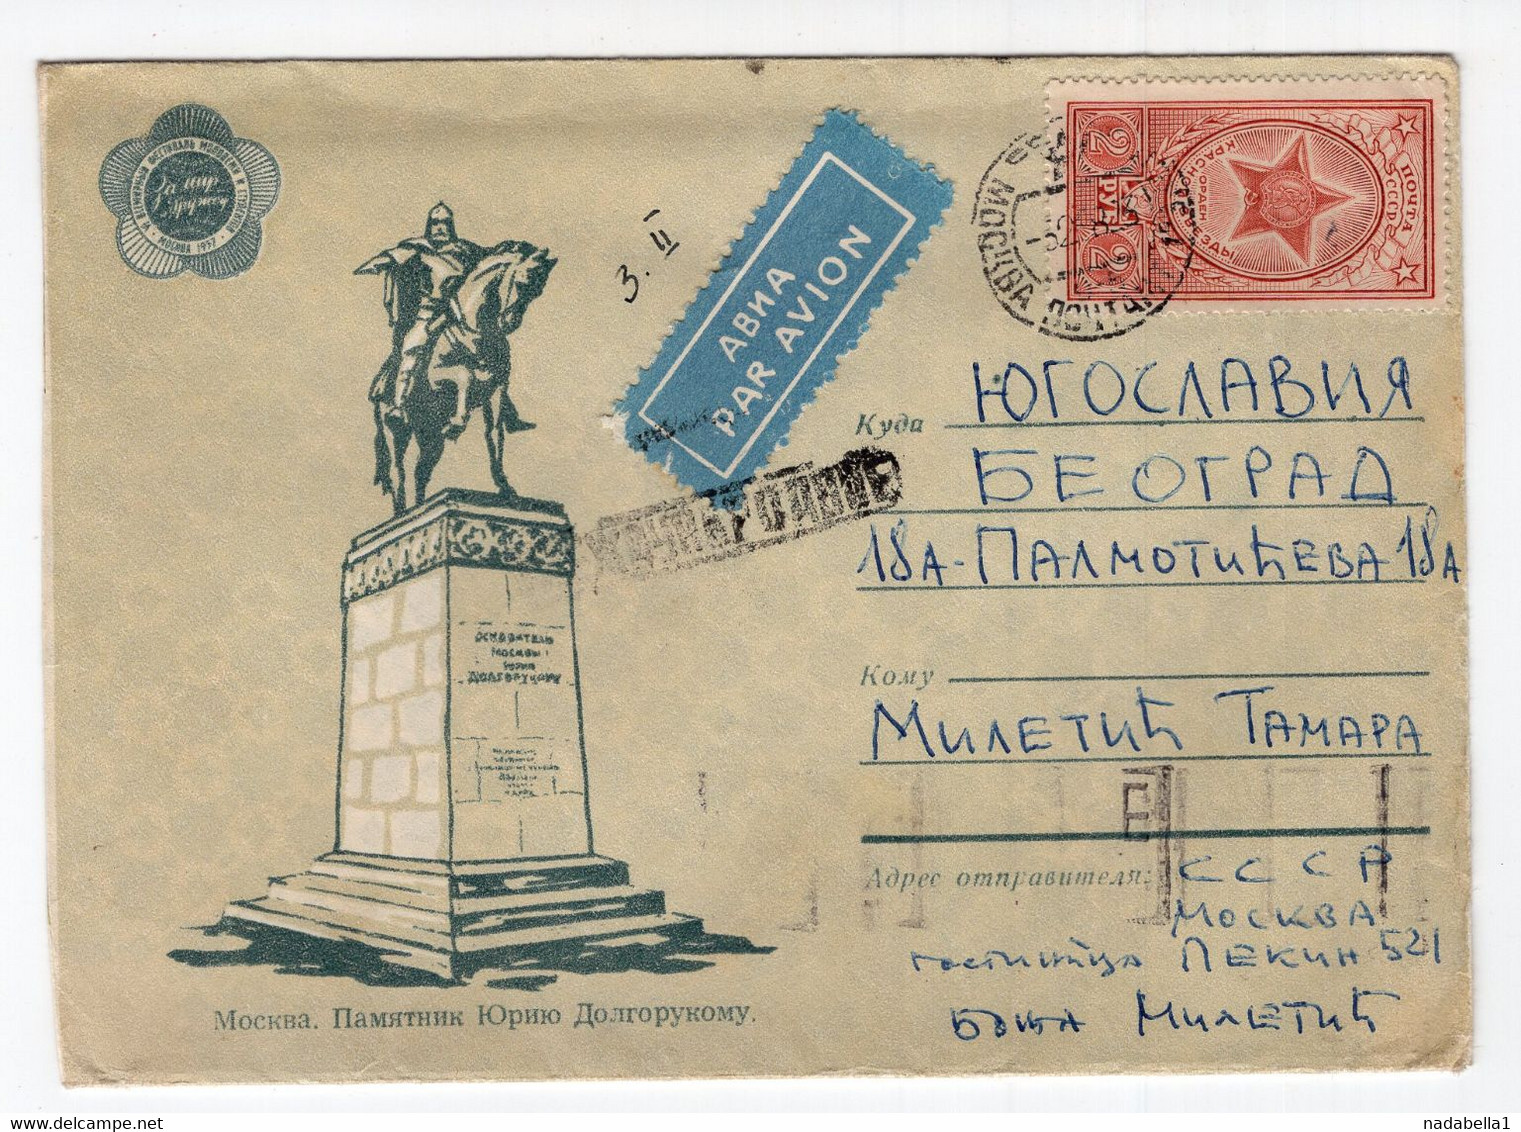 1958 RUSSIA,MOSCOW TO BELGRADE,YUGOSLAVIA,AIRMAIL,2 R STAMP,RED MEDAL,YURY DOLGORUKY,ILLUSTRATED COVER,USED - Covers & Documents